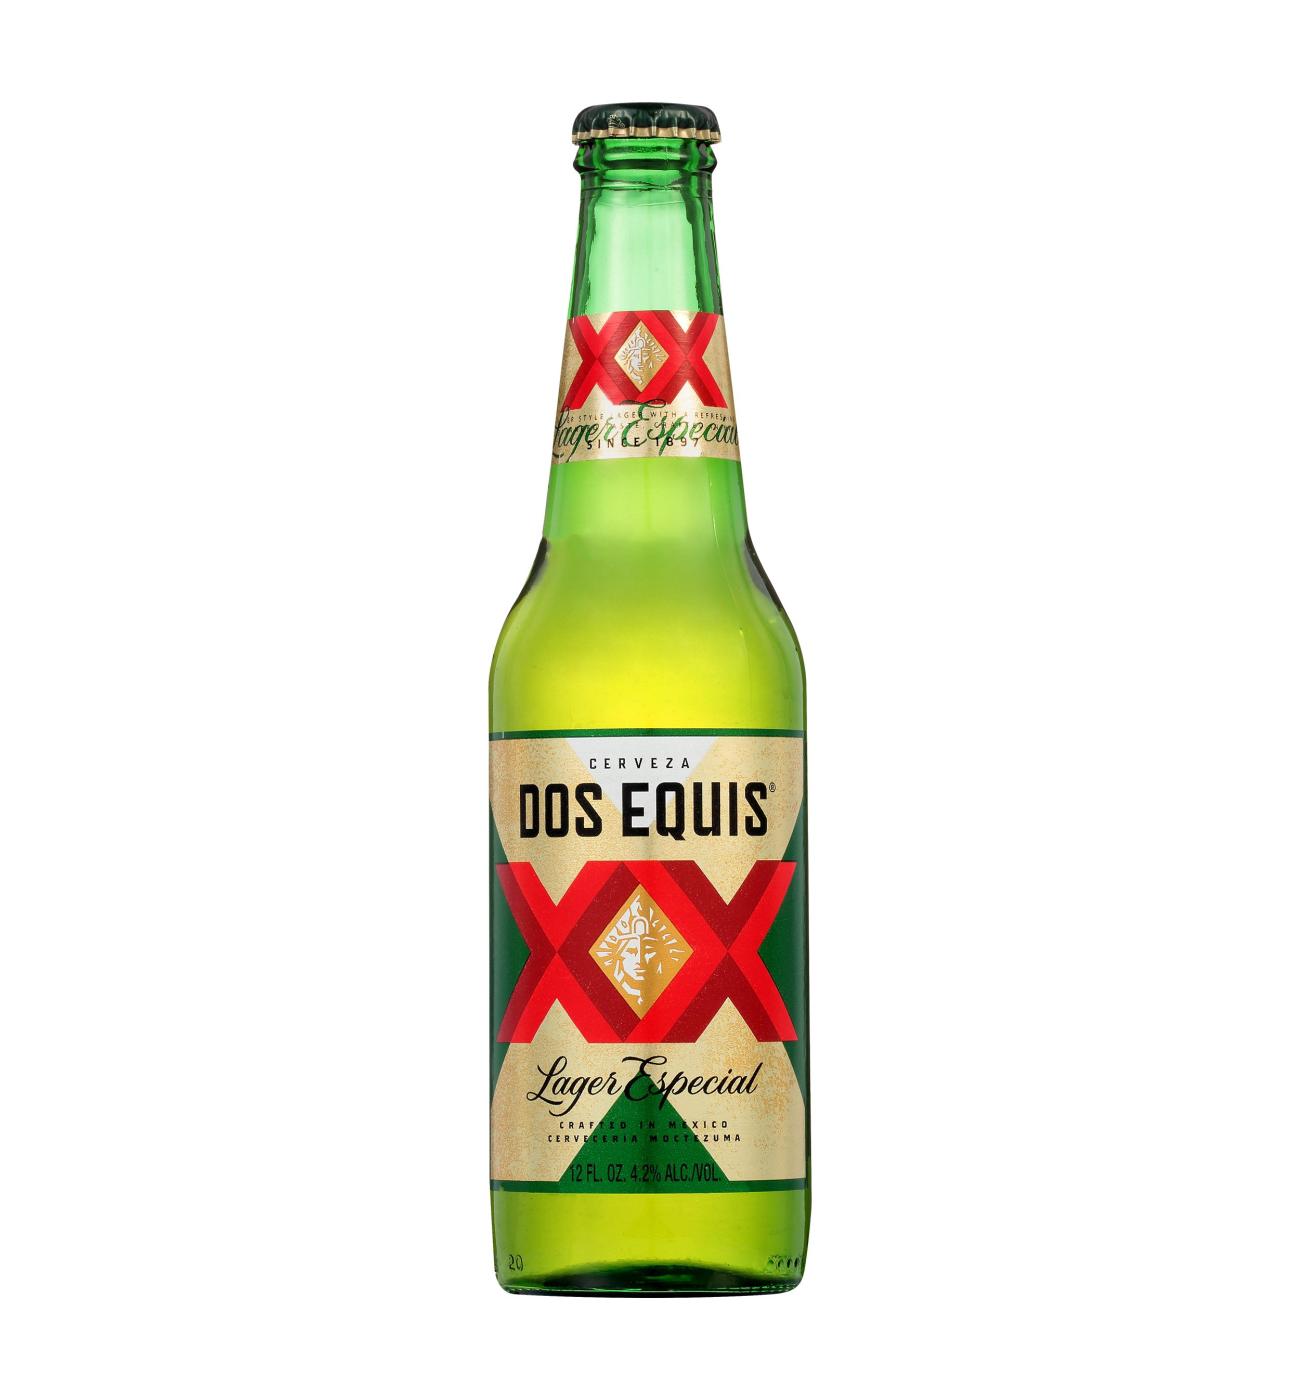 Dos Equis Lager Especial Beer 6 pk Bottles; image 3 of 3